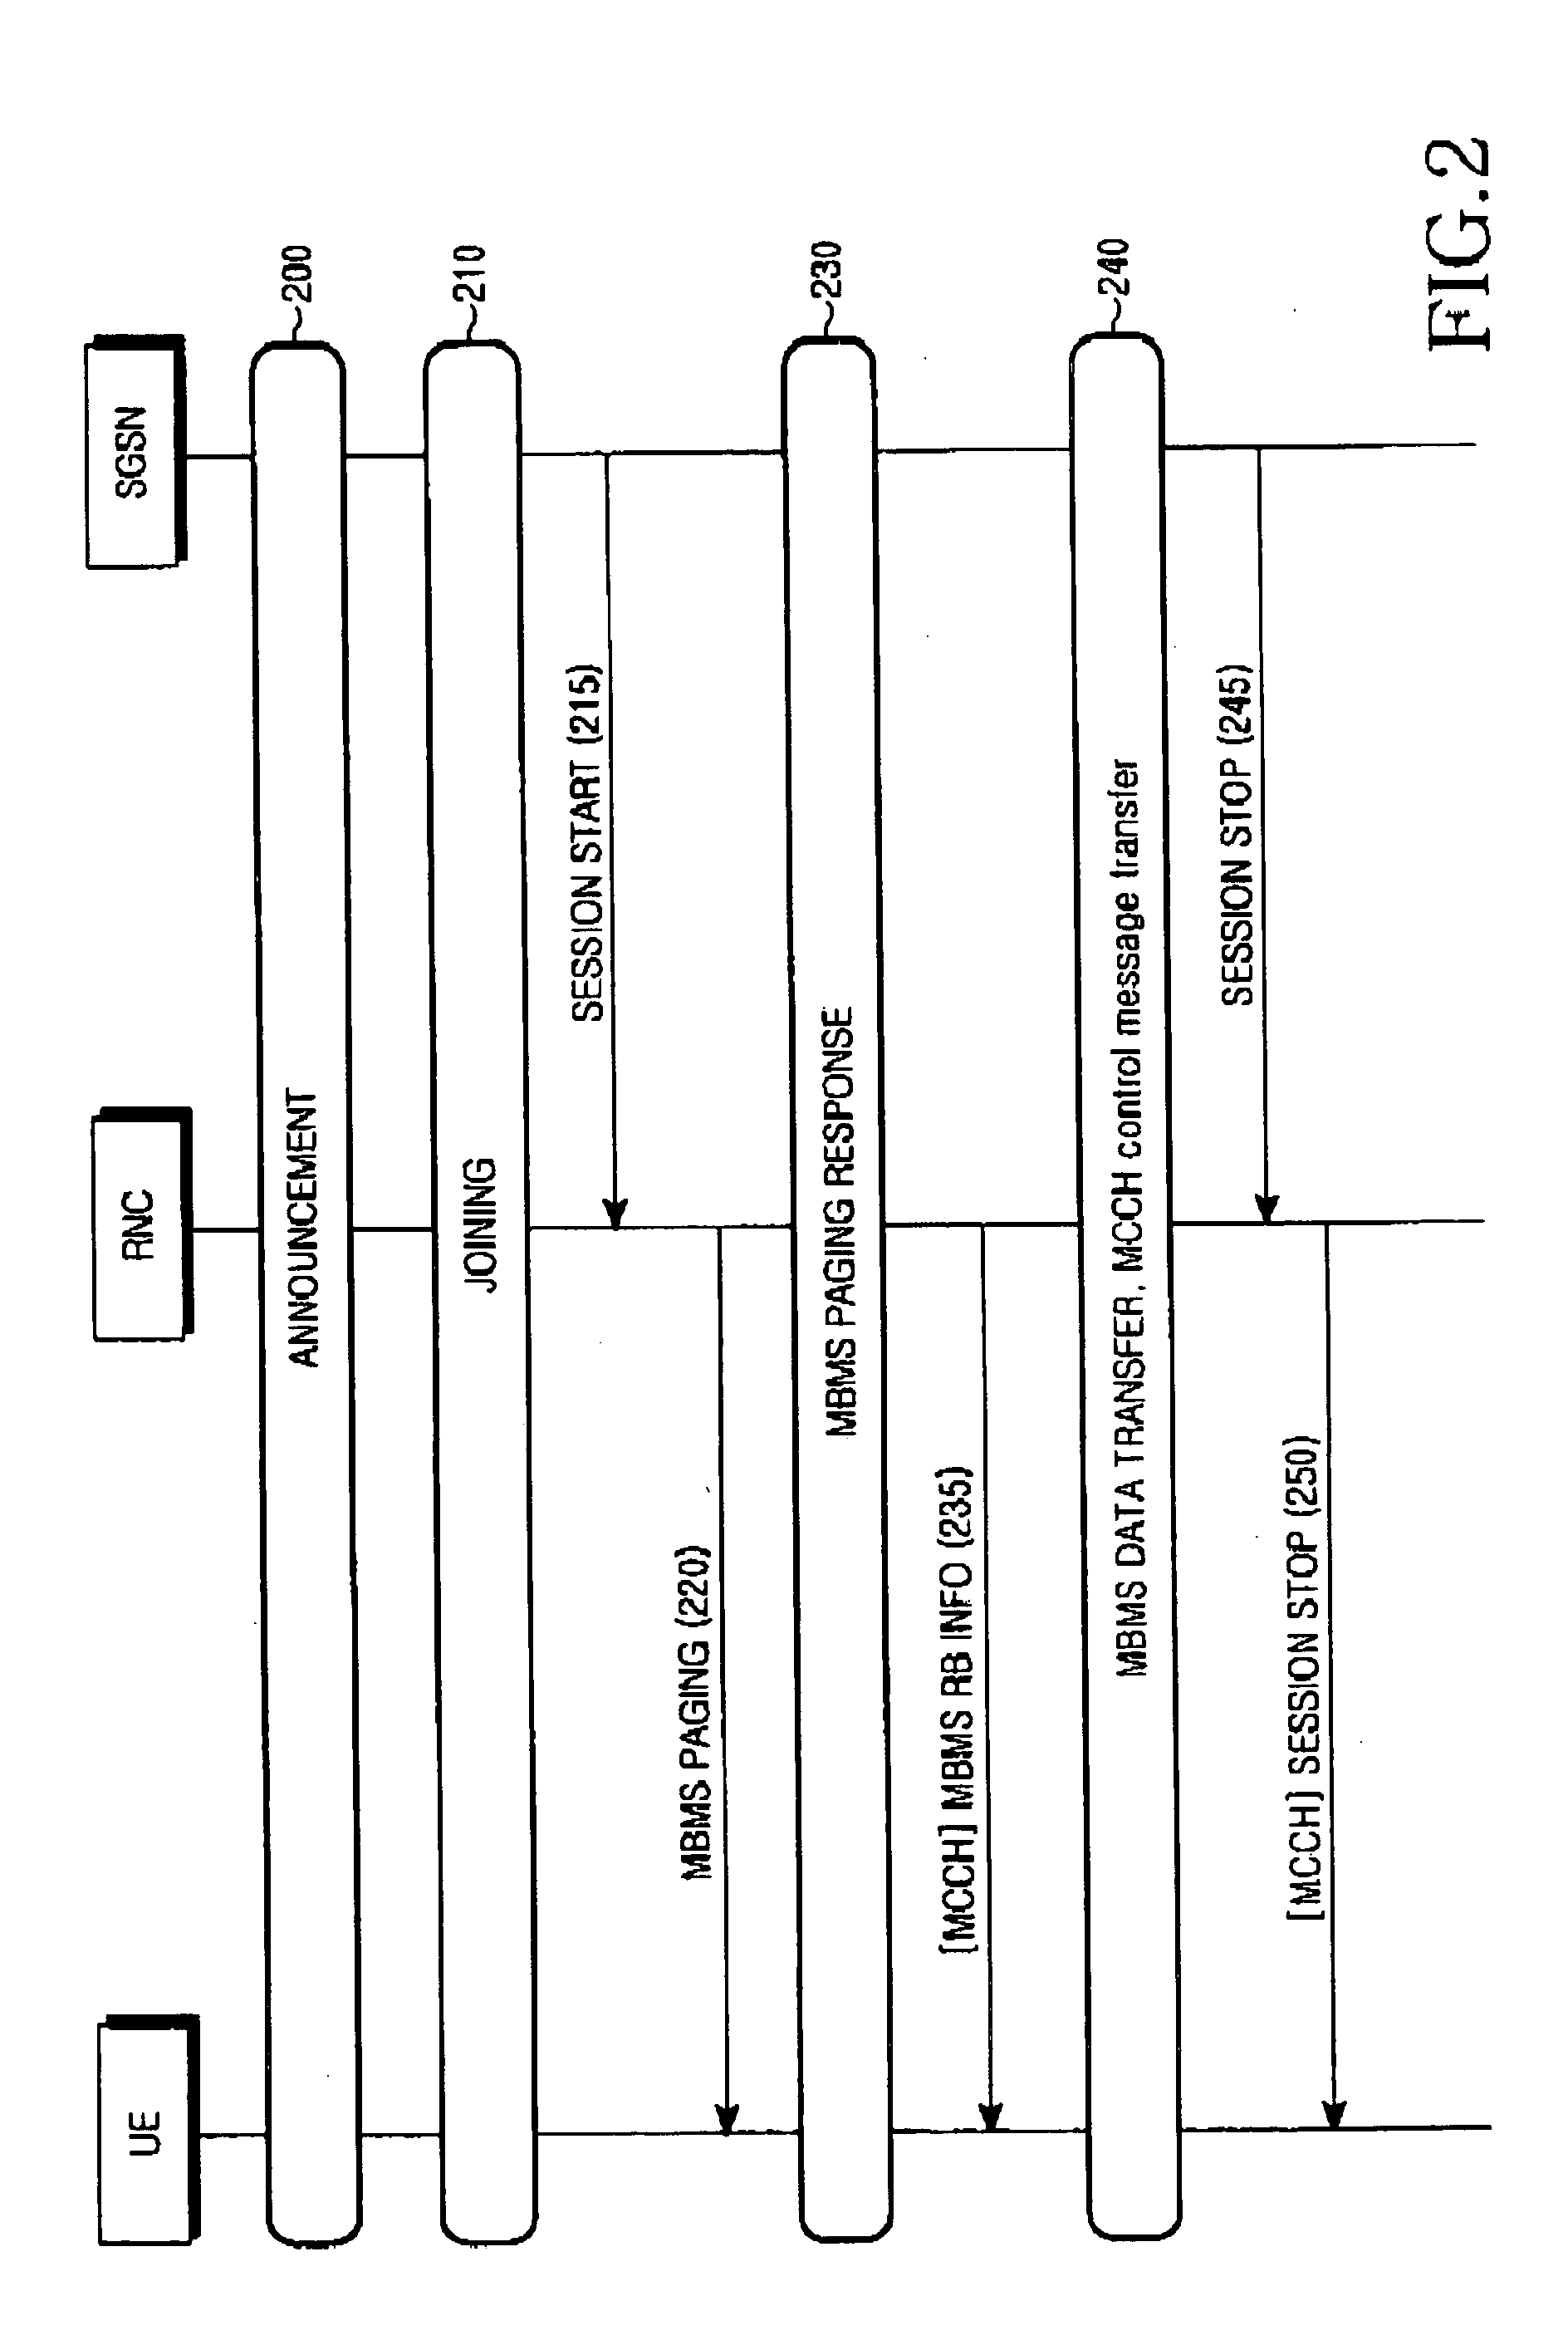 Method for providing requested MBMS service to UEs that failed to receive paging message in a mobile communication system supporting MBMS service